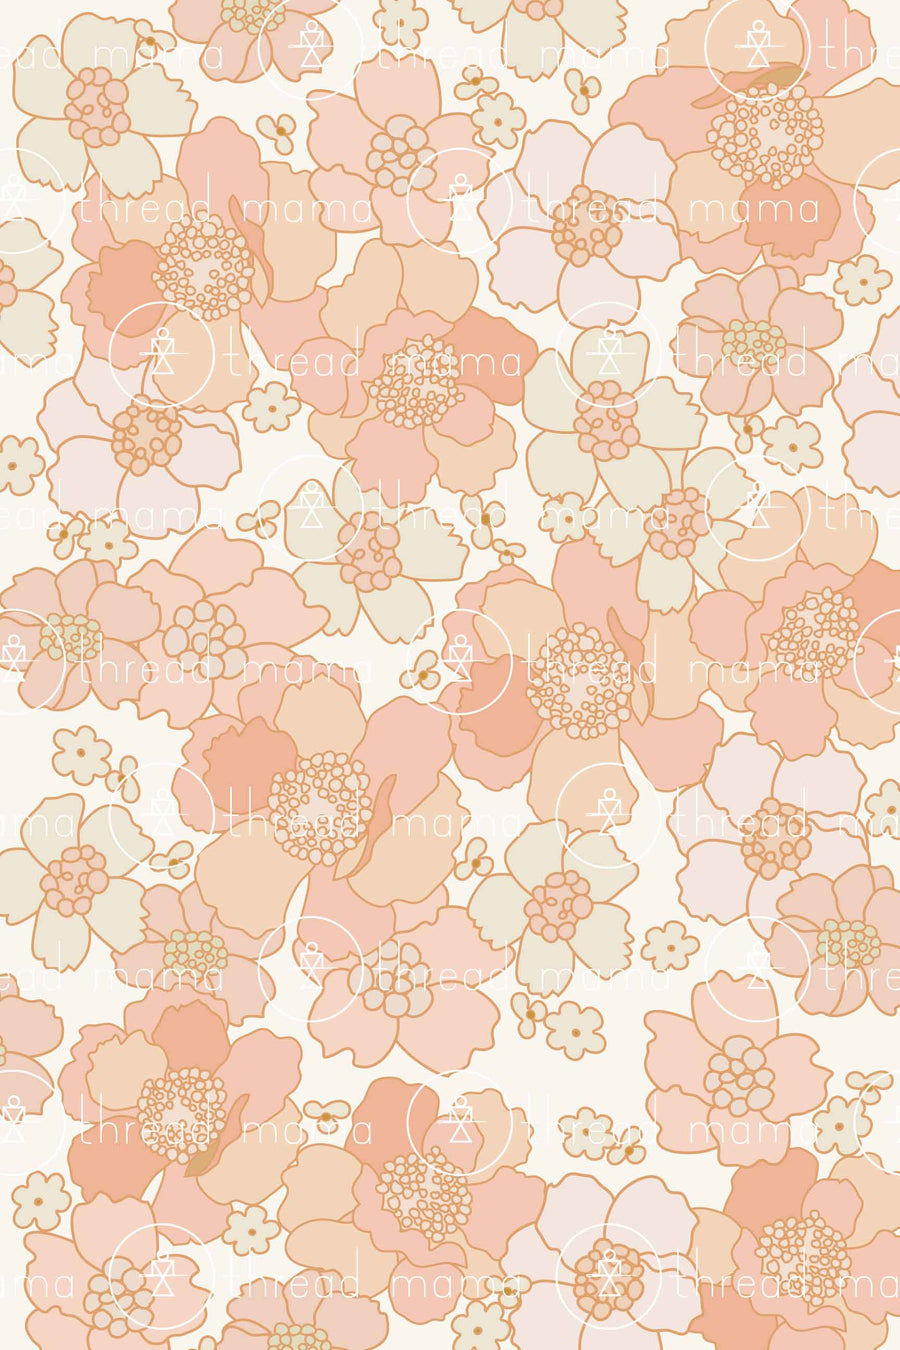 Repeating Pattern #18 (Seamless)